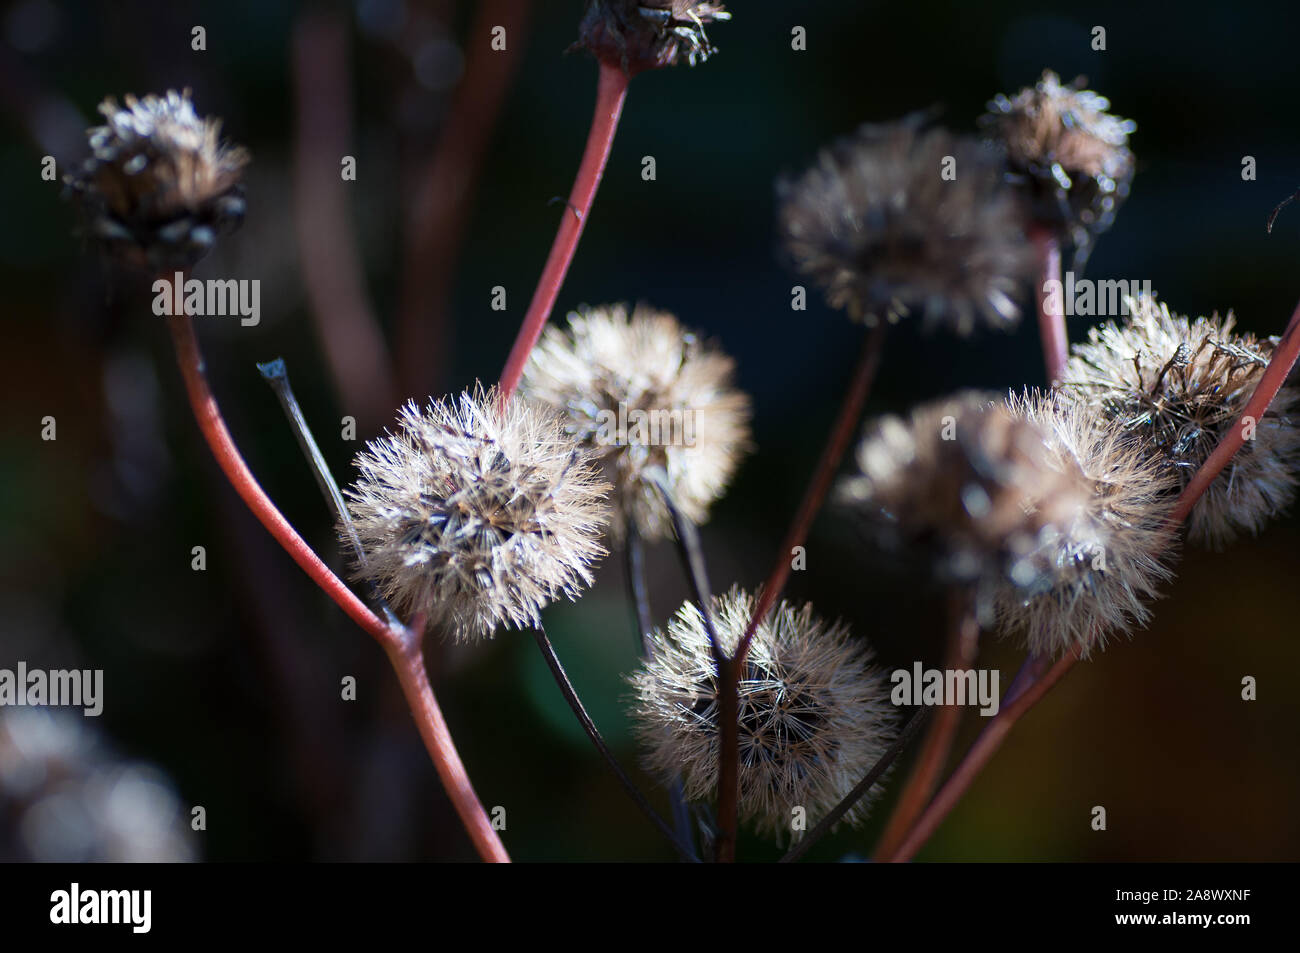 the seed pods or heads of Eastern showy aster (Eurybia spectabilis) Stock Photo